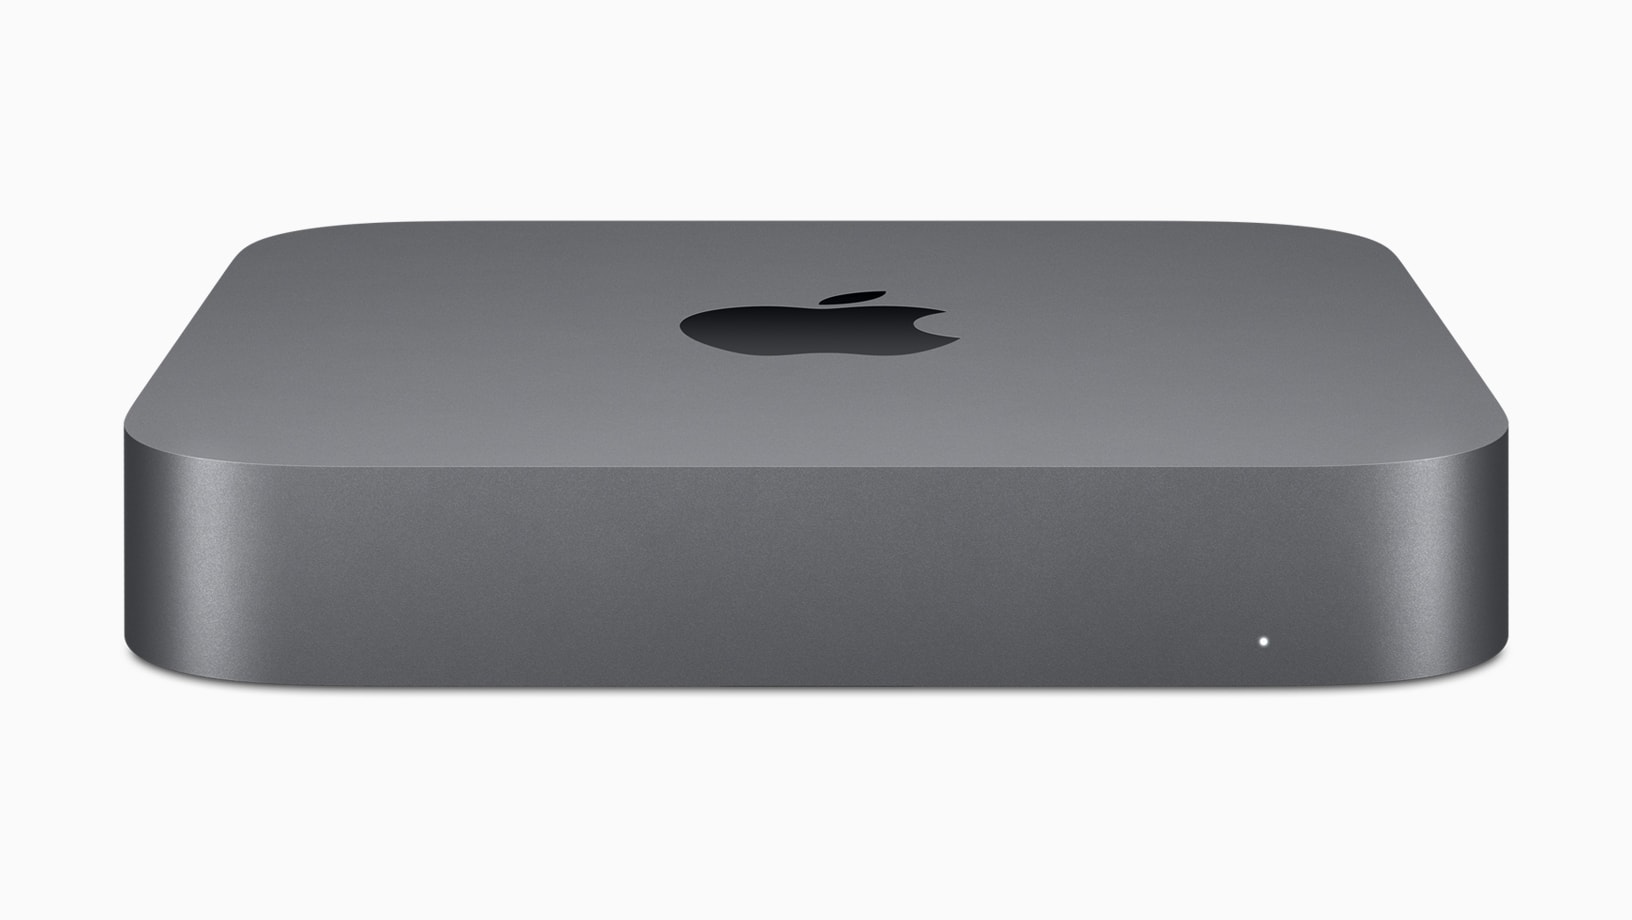 New Mac mini from the front from above